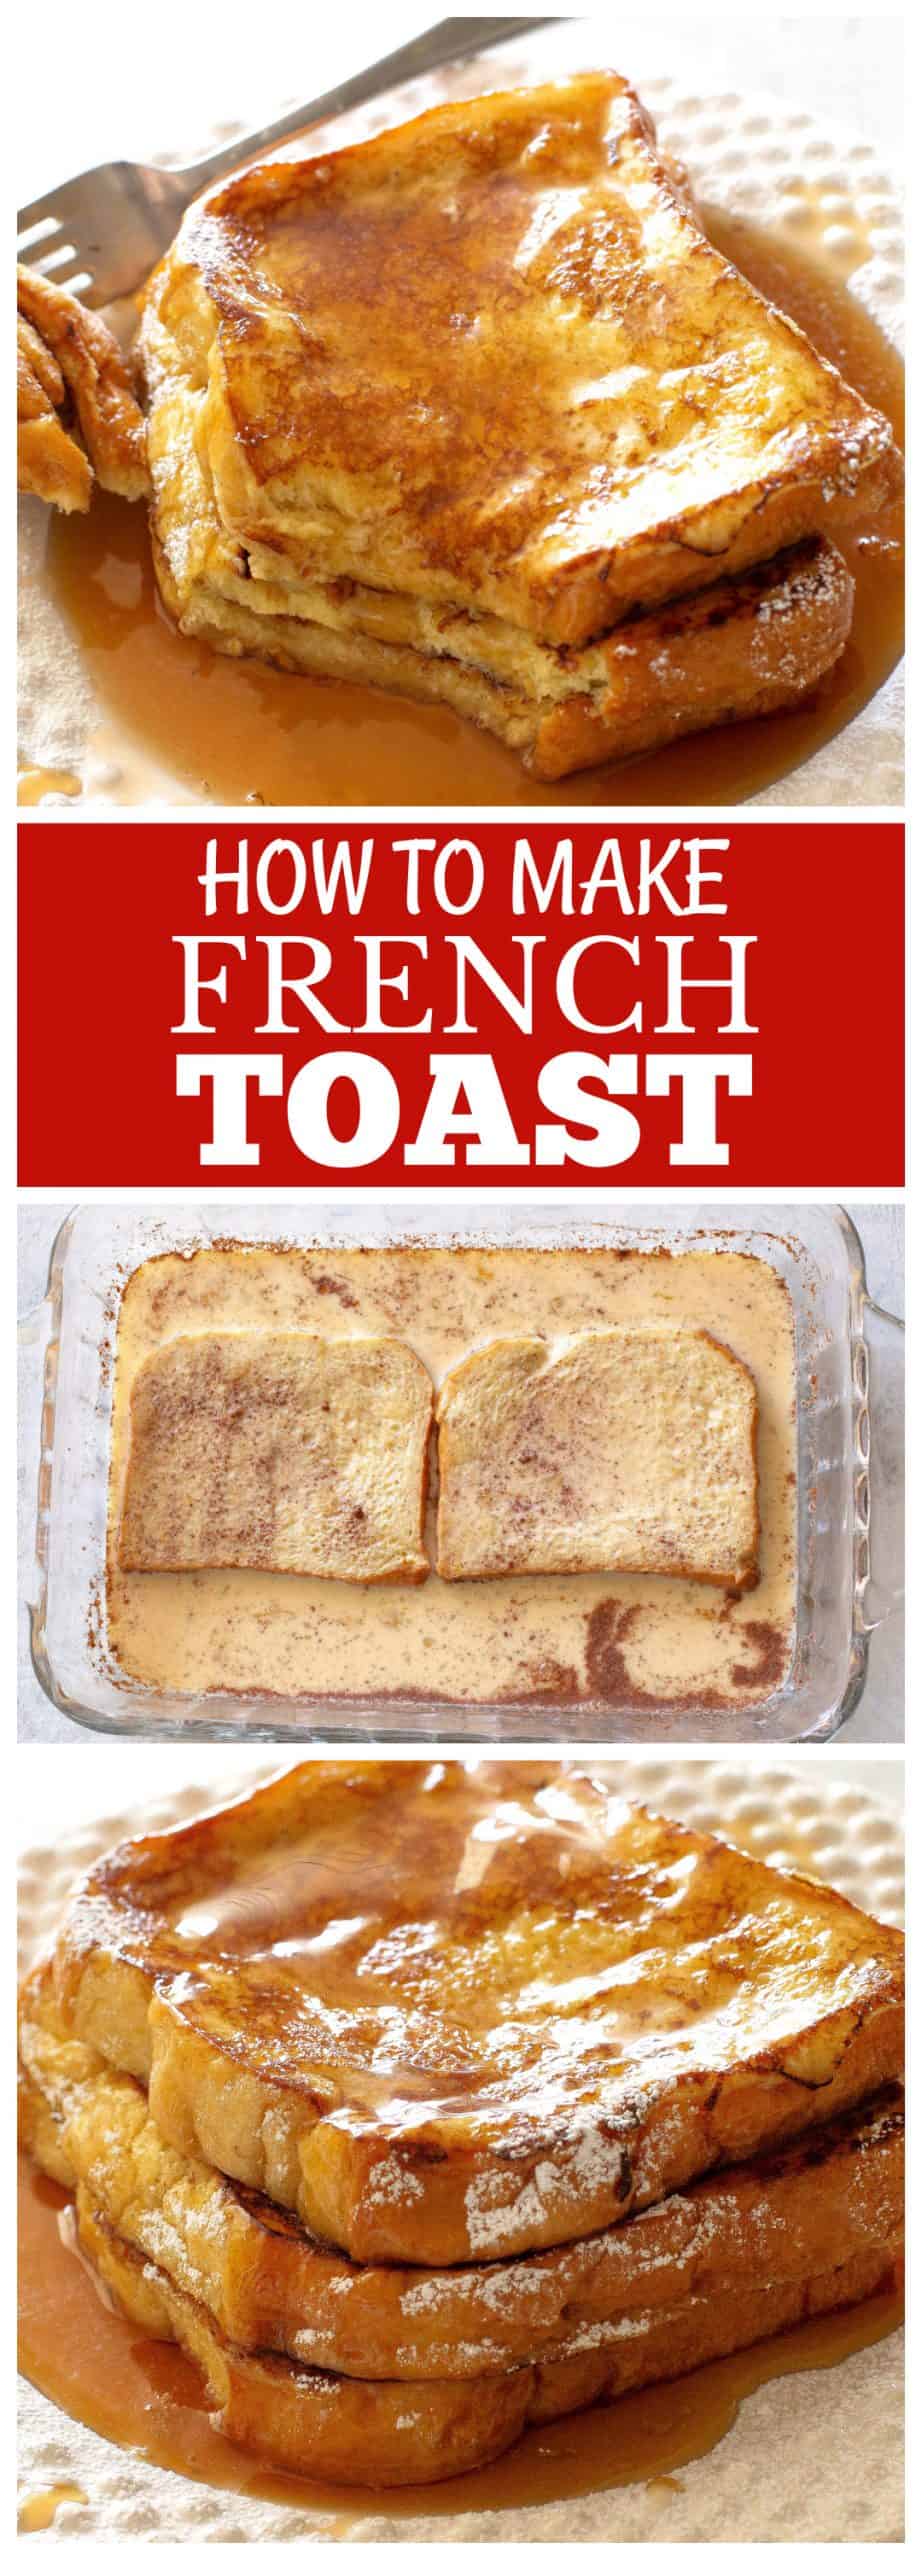 https://www.the-girl-who-ate-everything.com/wp-content/uploads/2022/09/french-toast-recipe-scaled.jpg